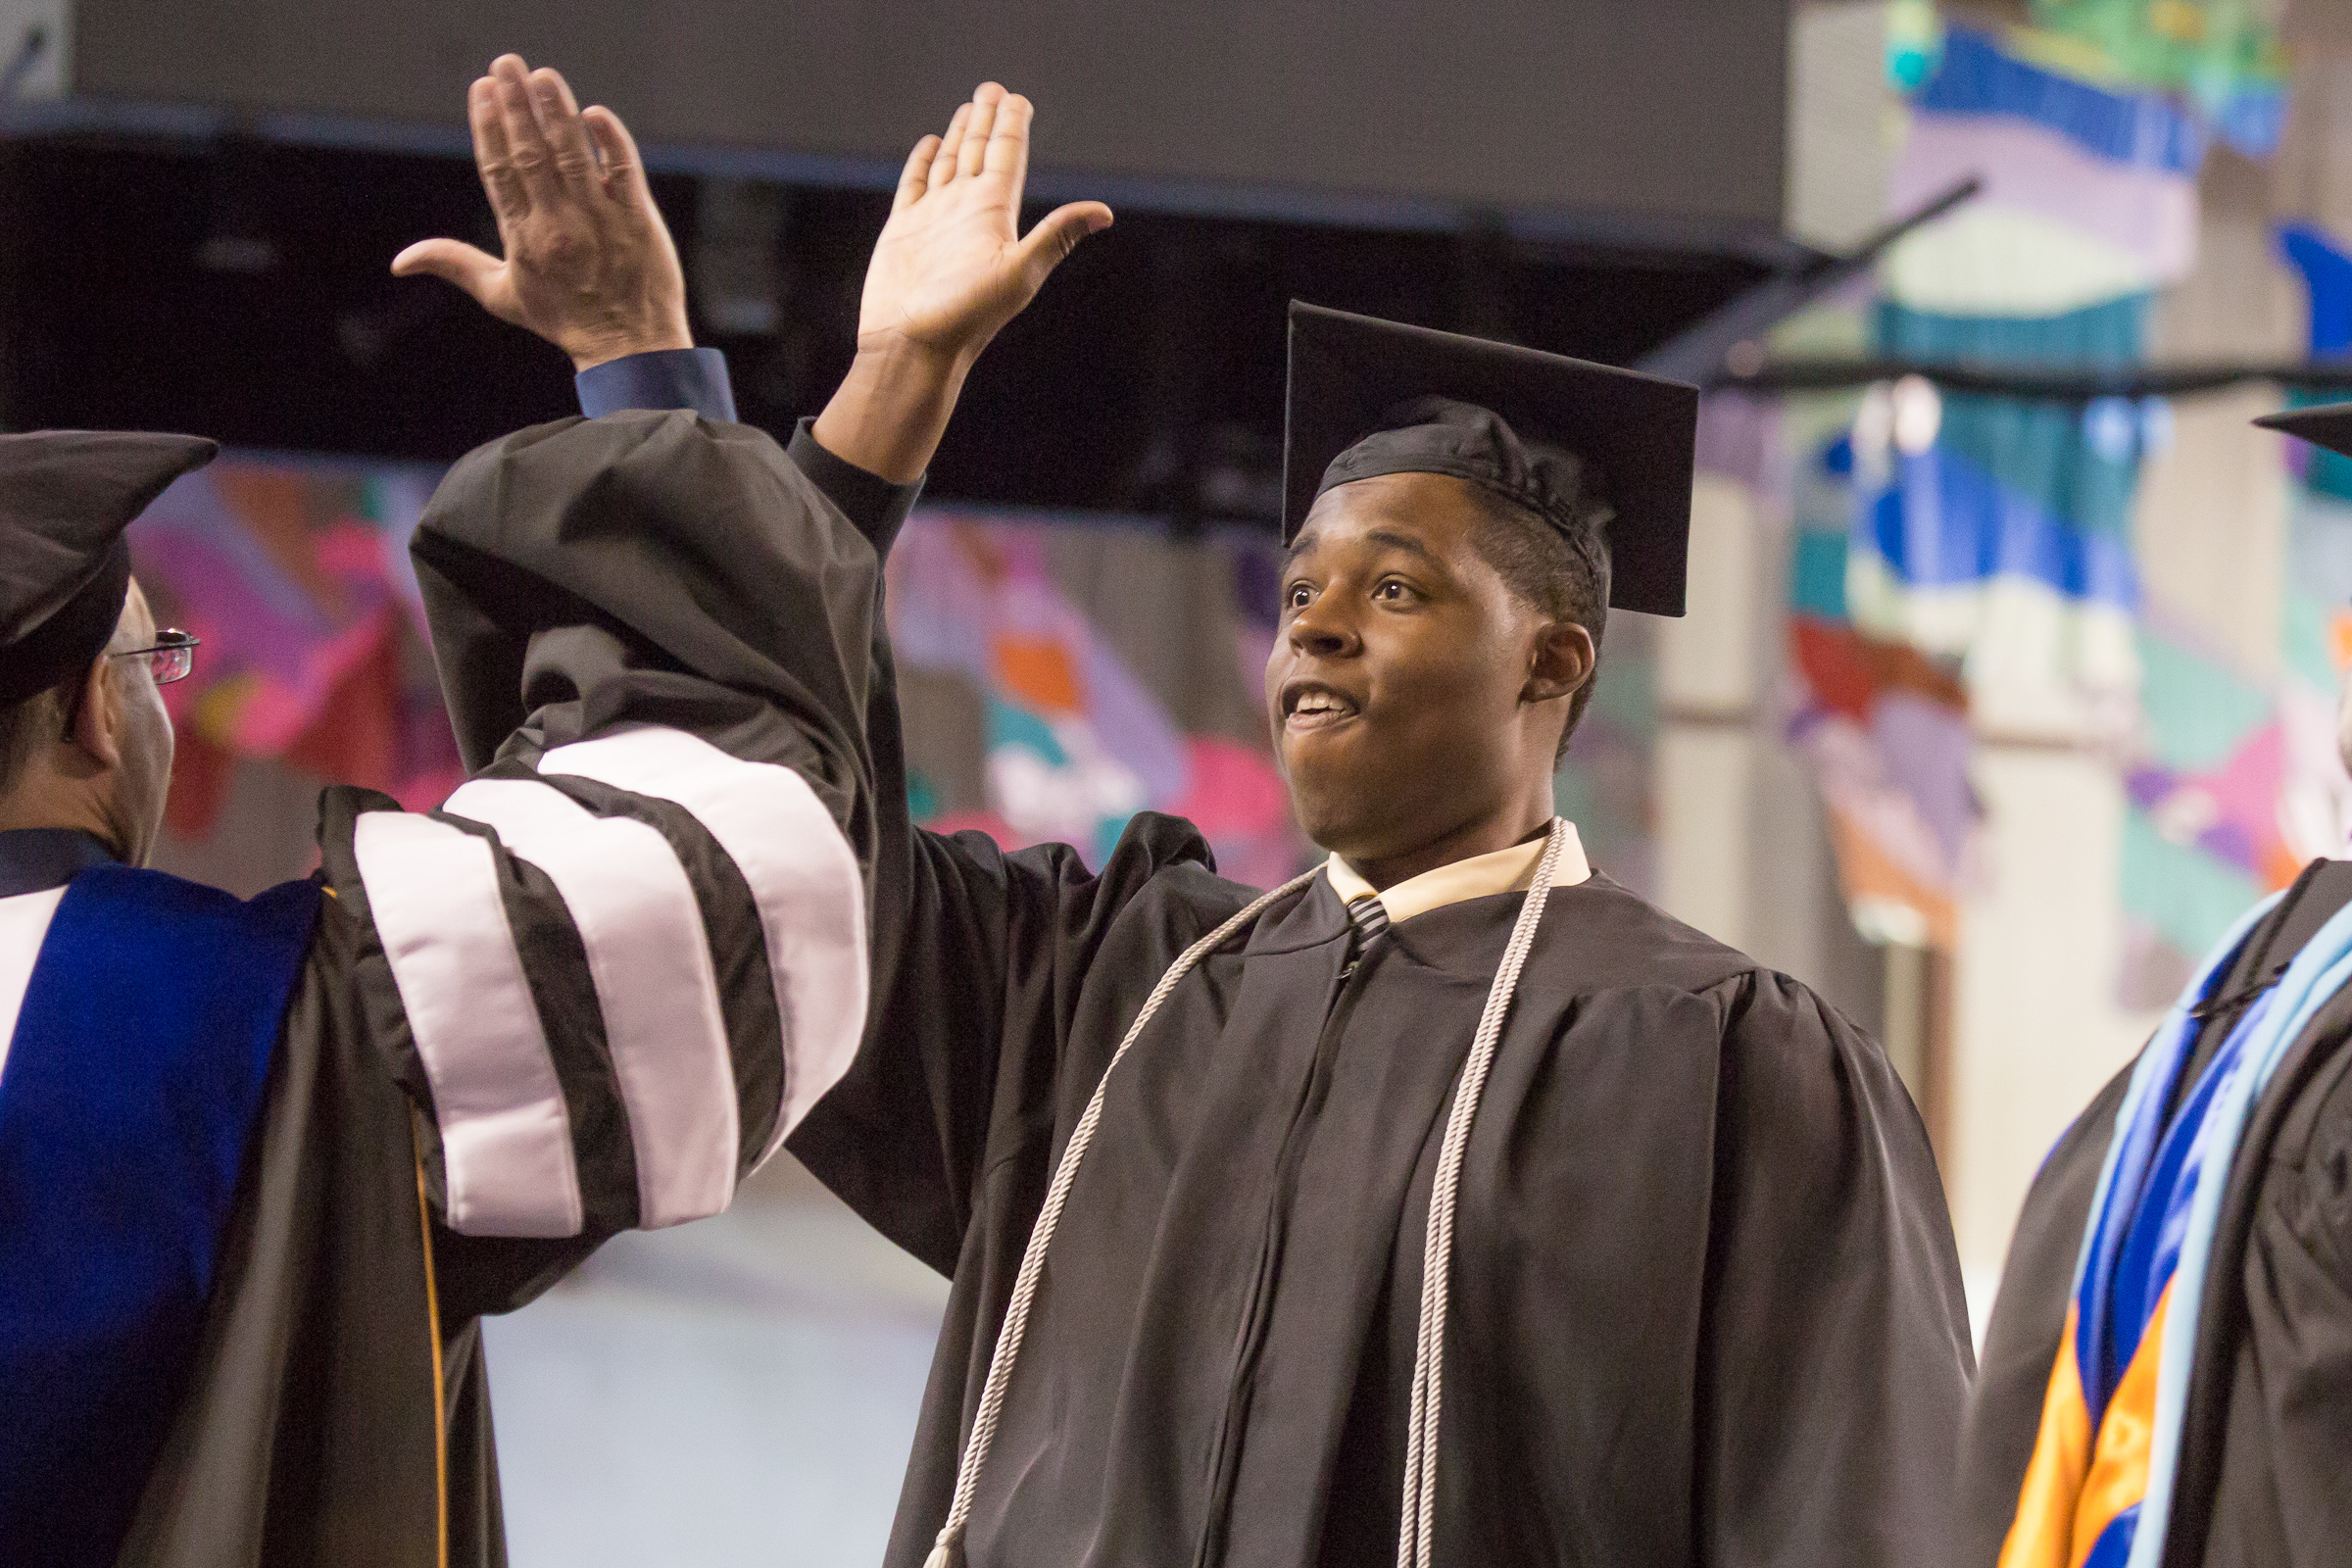 Robert Kinnard III shares a high five with Vice Chancellor Mike Sfraga after earning his degree in justice. | UAF Photo by Todd Paris